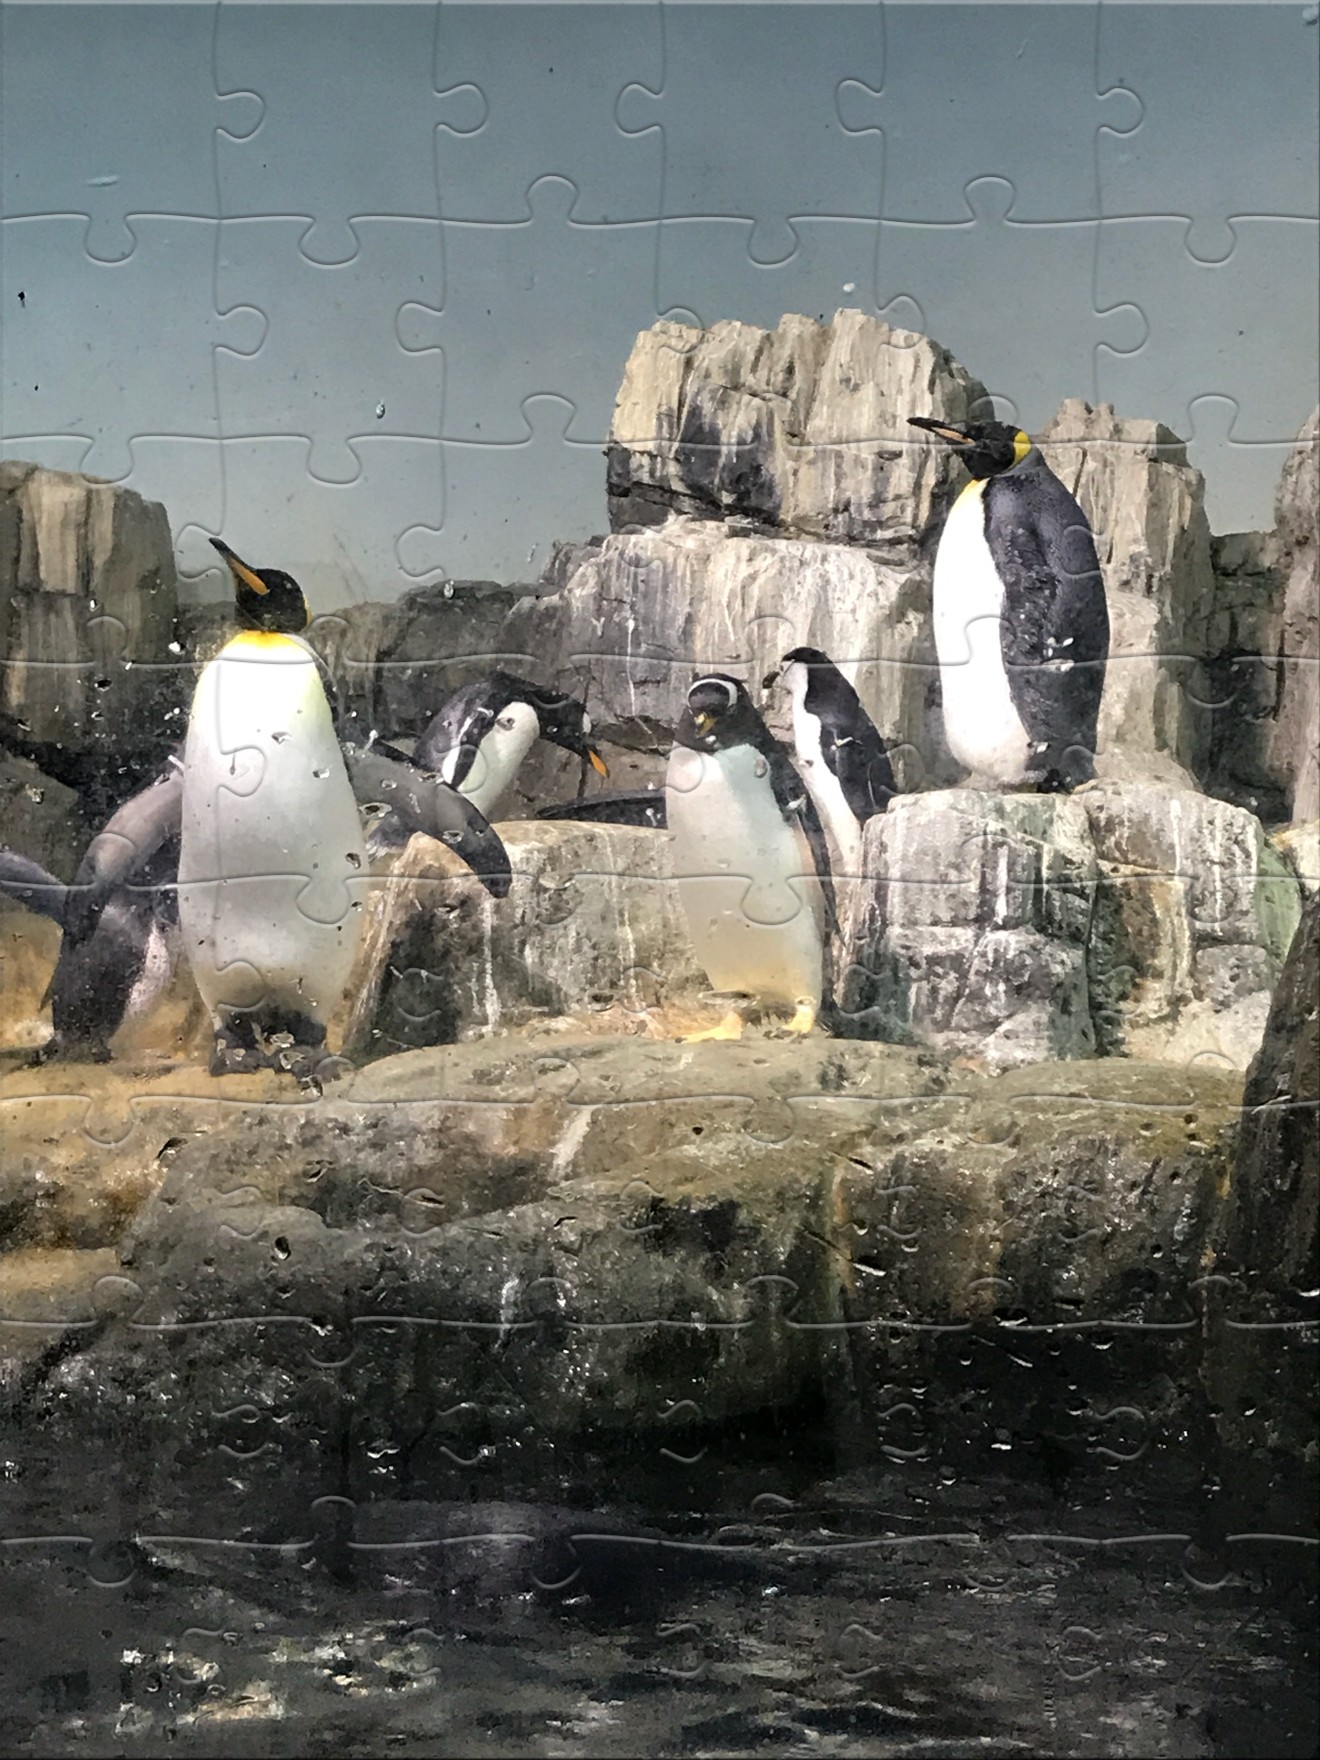 48 Pieces — Completed Jigsaw Puzzle “penguins”